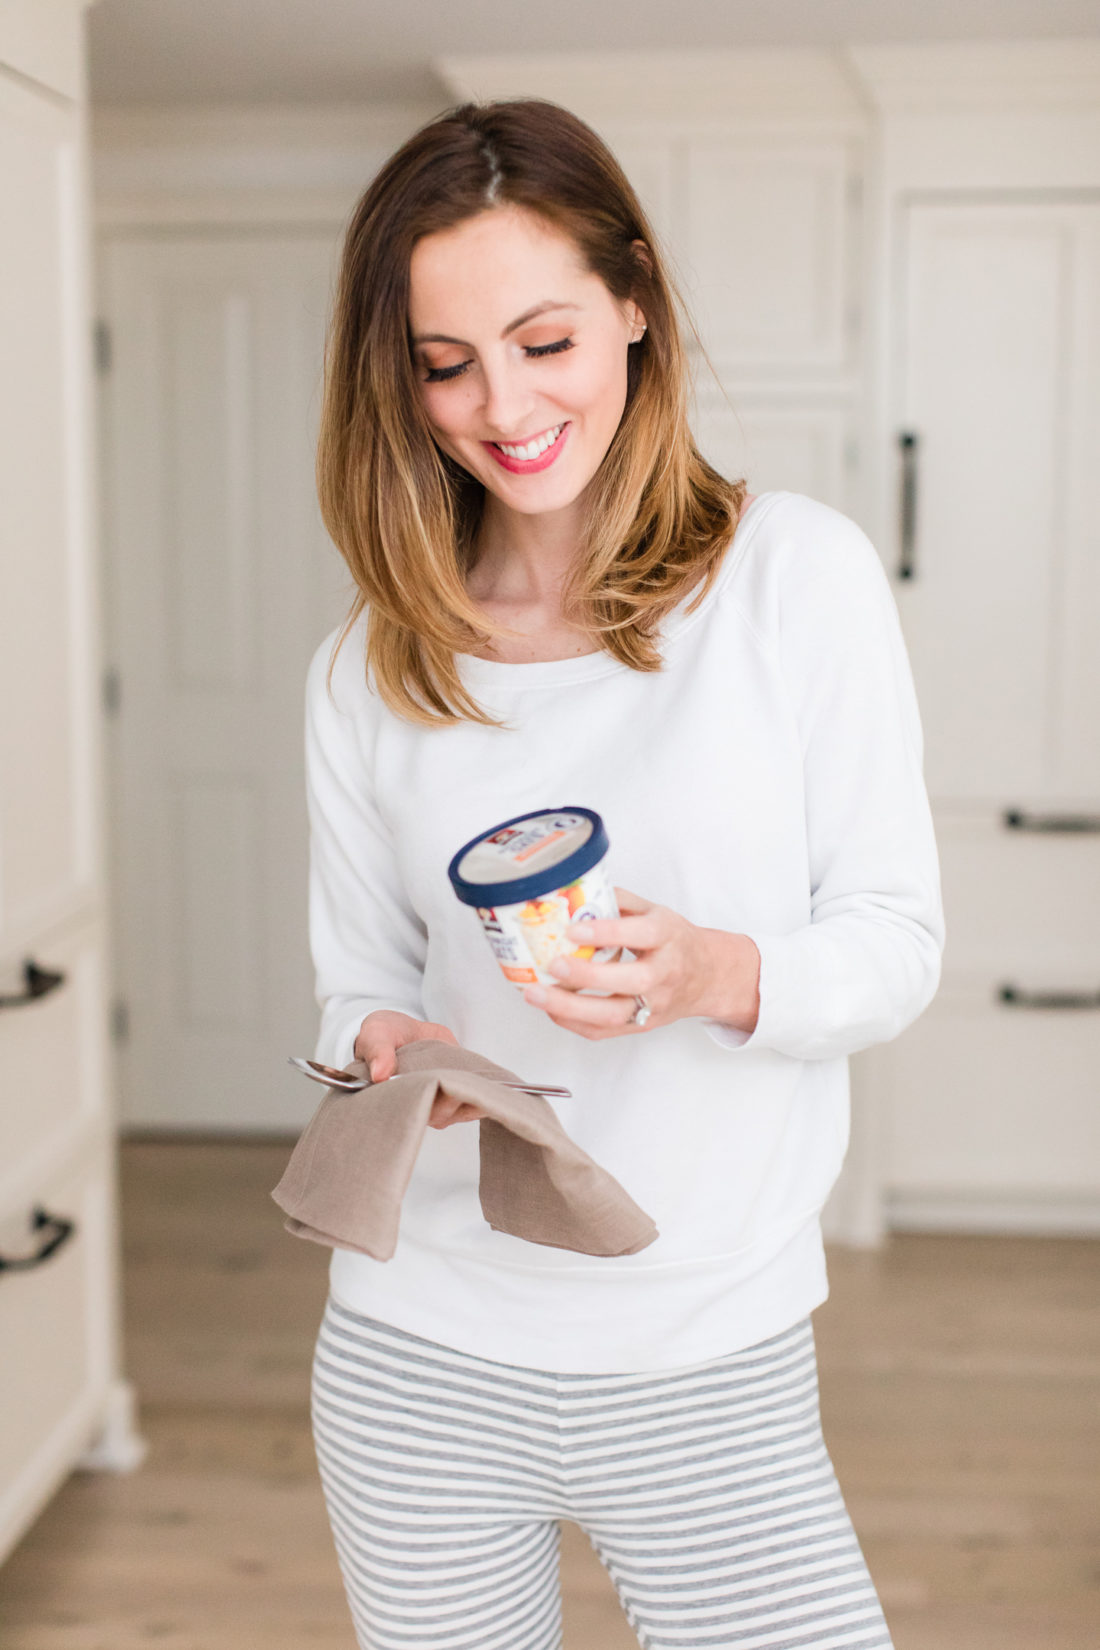 After steeping overnight, Eva Amurri Martino wears pajamas and prepares to eat her Quaker Overnight Oats for breakfast